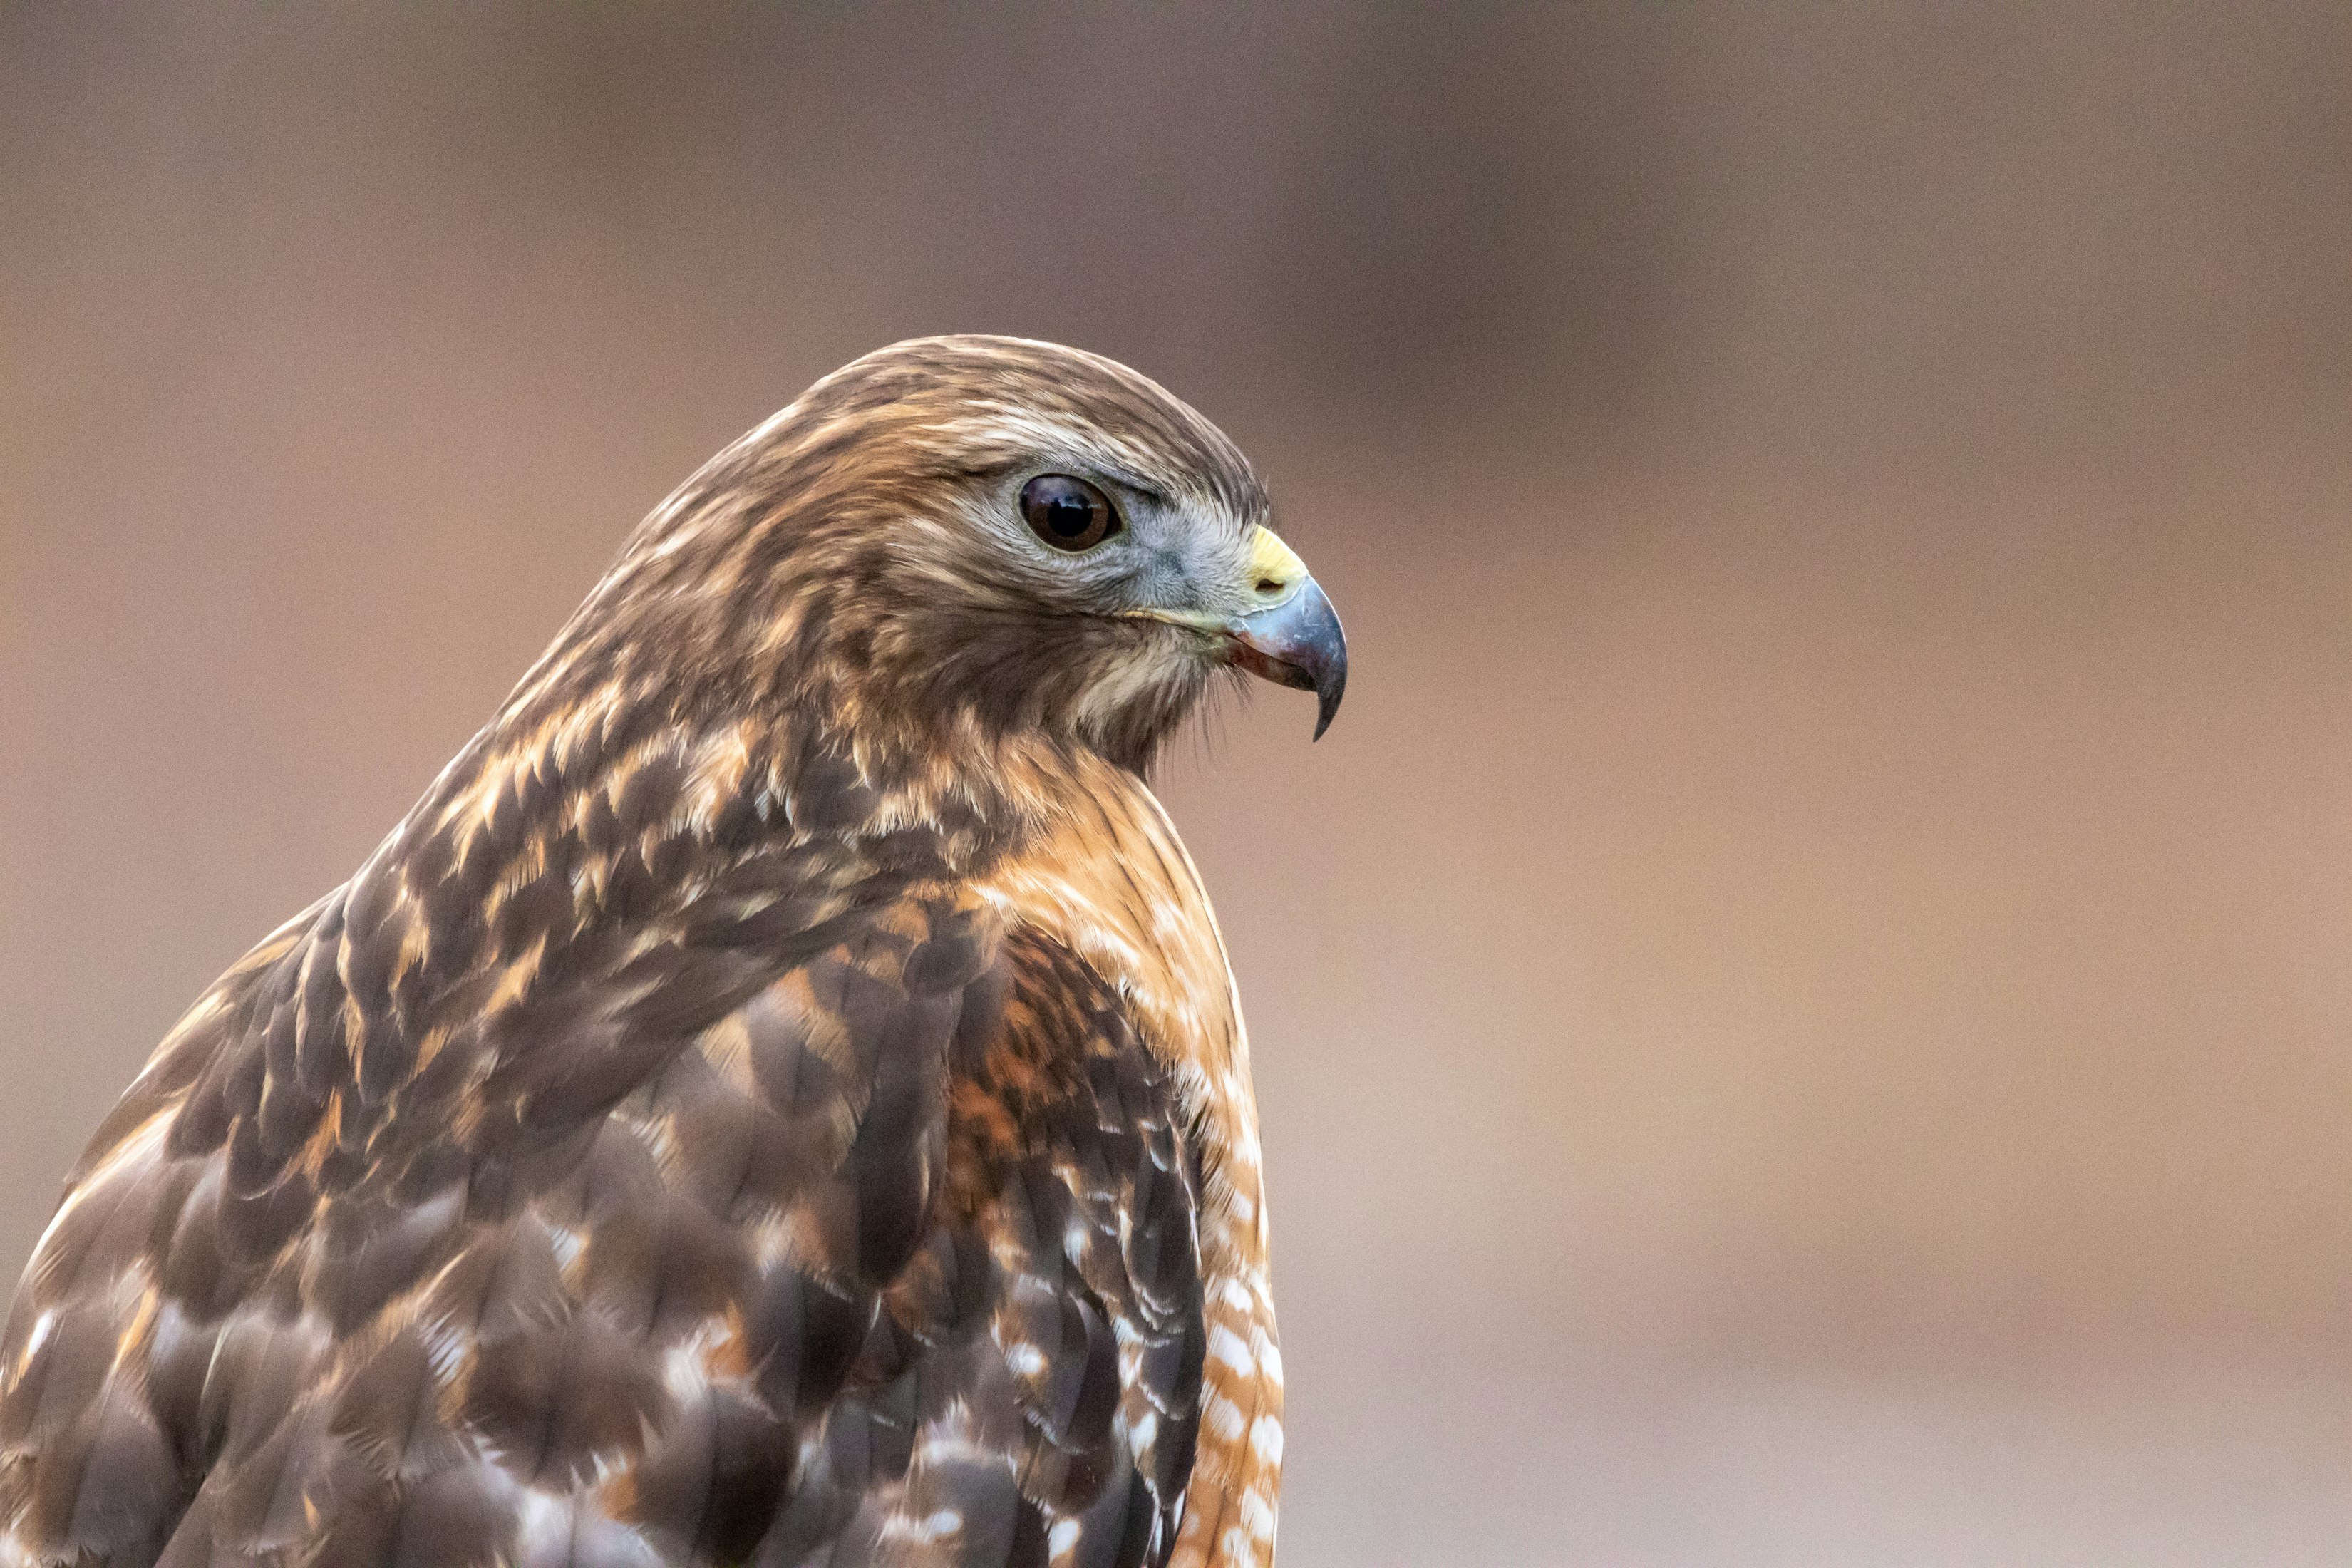 Birds of Prey Face Global Decline From Habitat Loss, Poisons